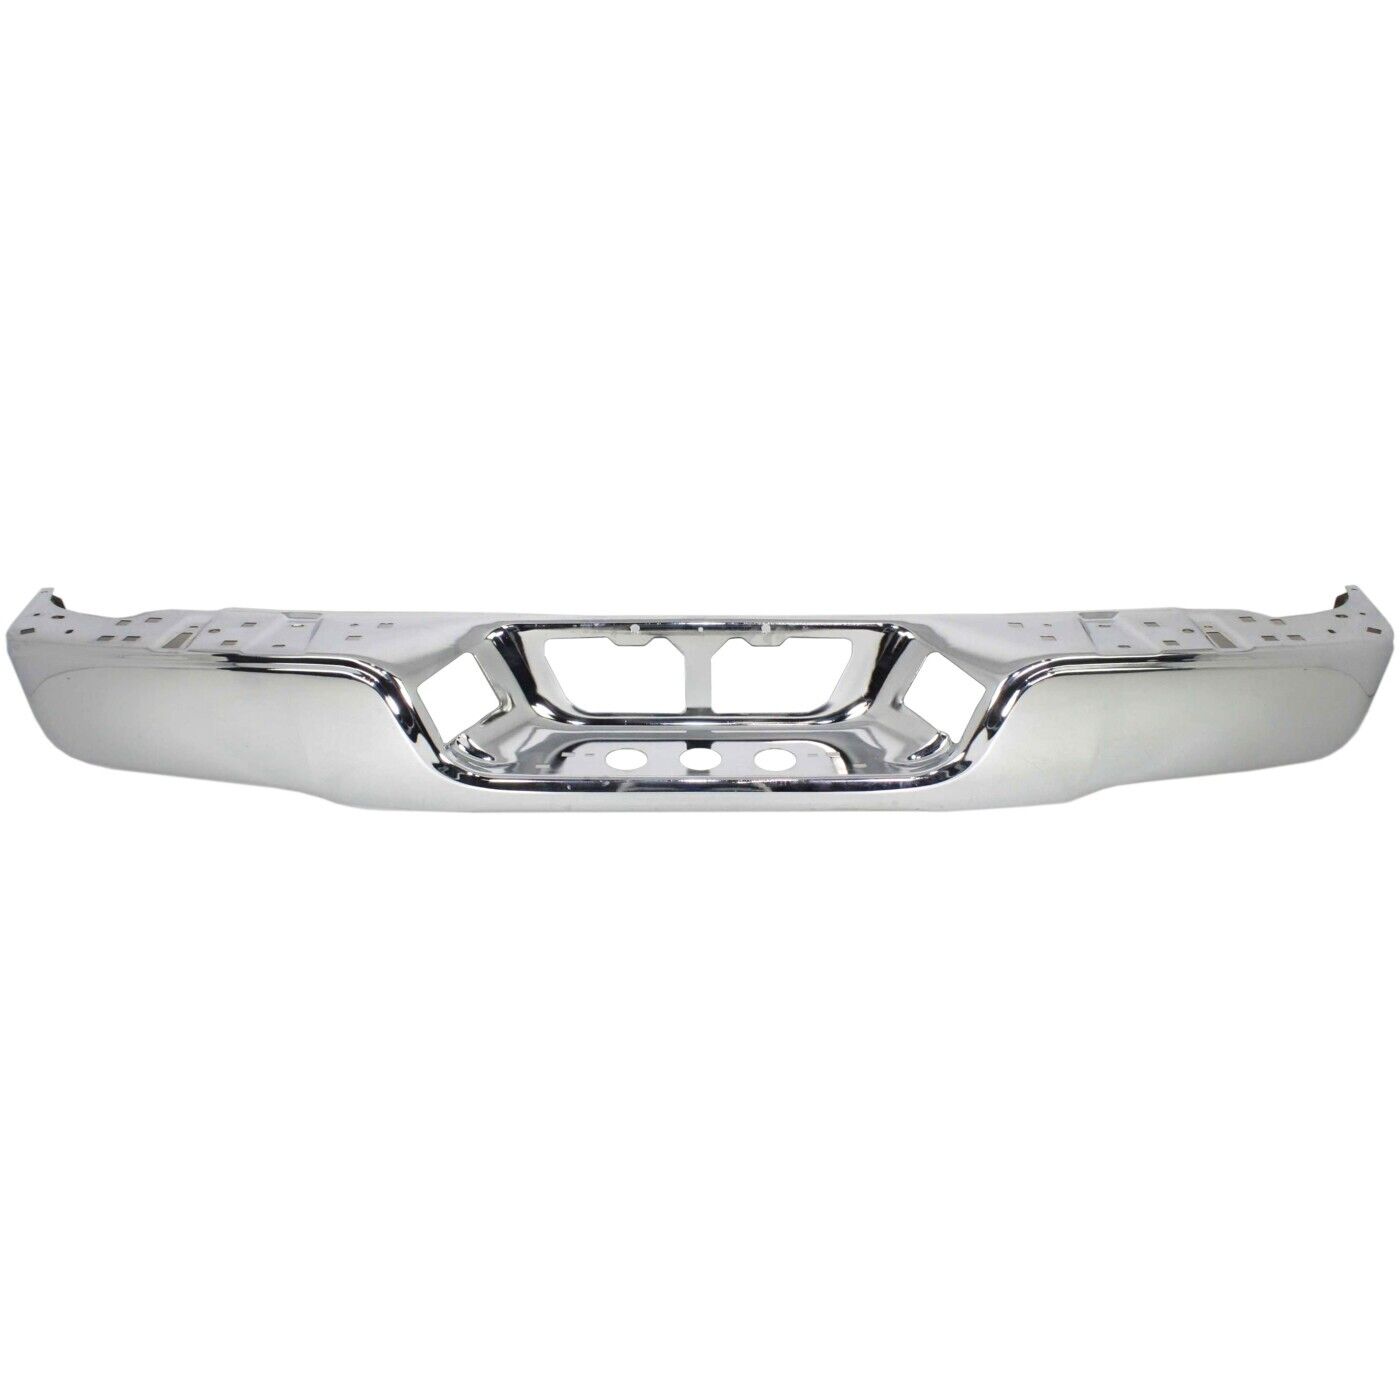 Step Bumper For 2007-2013 Toyota Tundra Face Bar w/ Rock Warrior Package Chrome